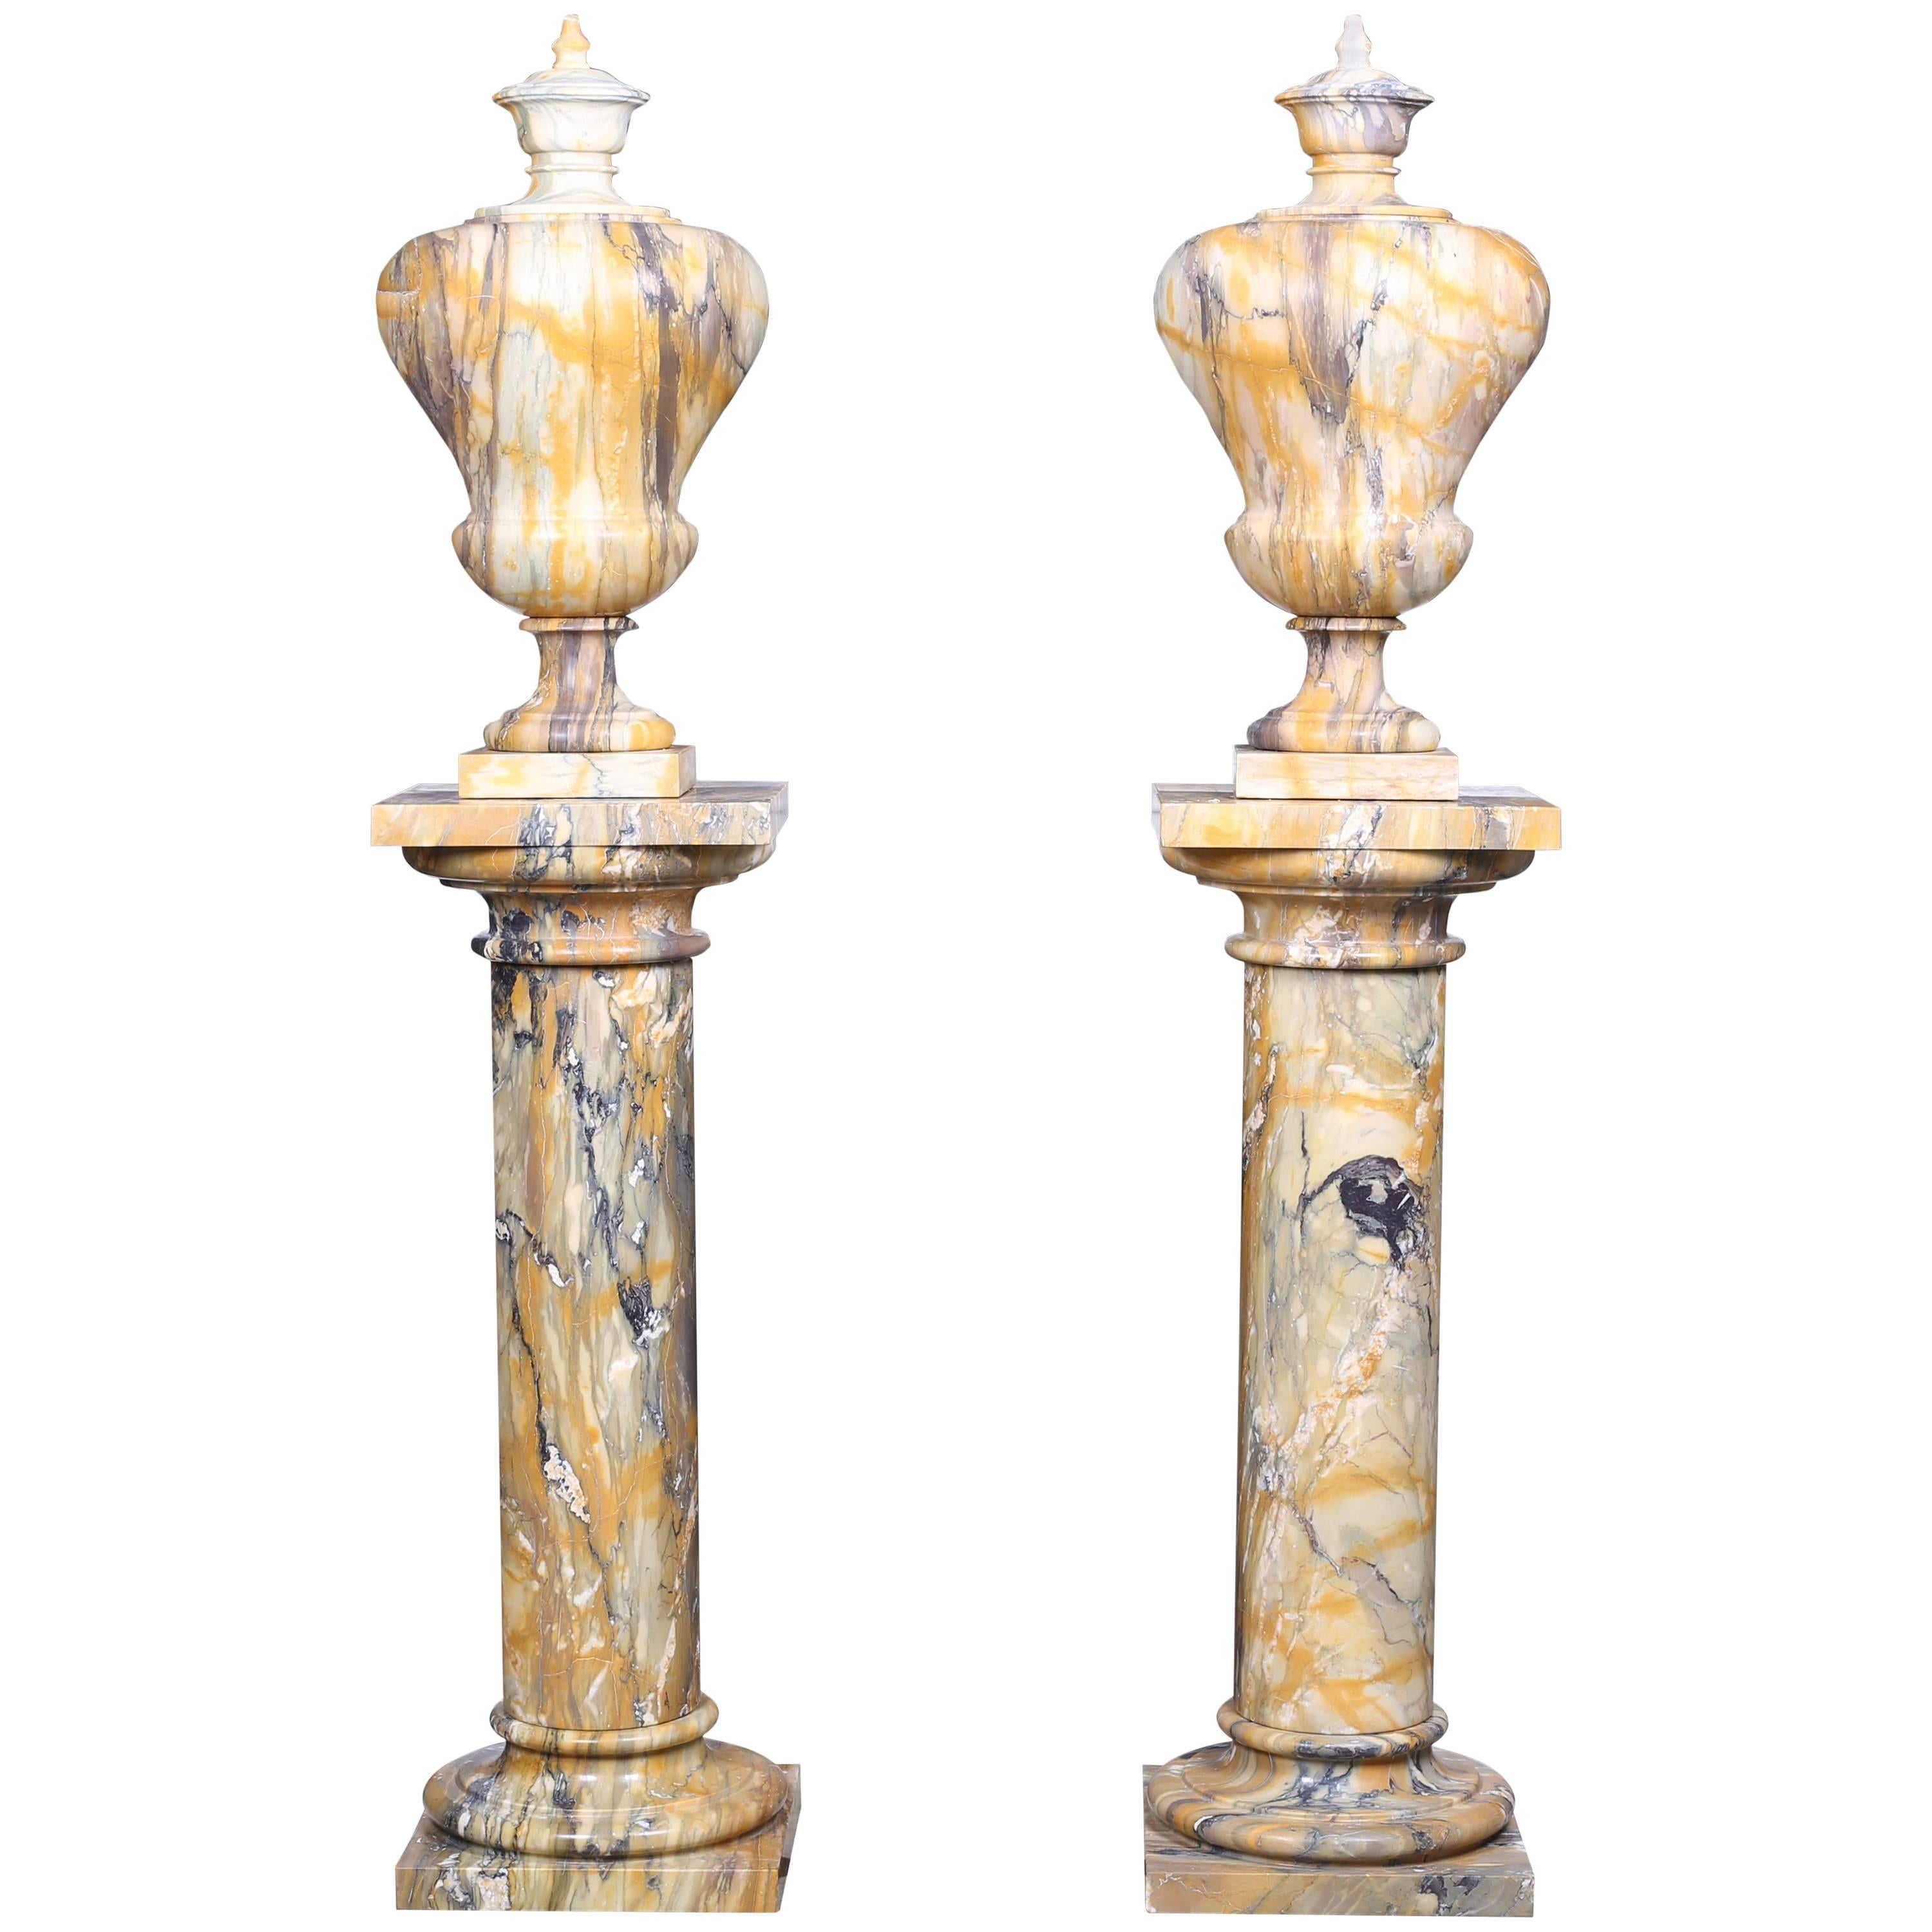 Pair of Vintage Grand Marble Urns on Column Plinths in the Neoclassical Style For Sale